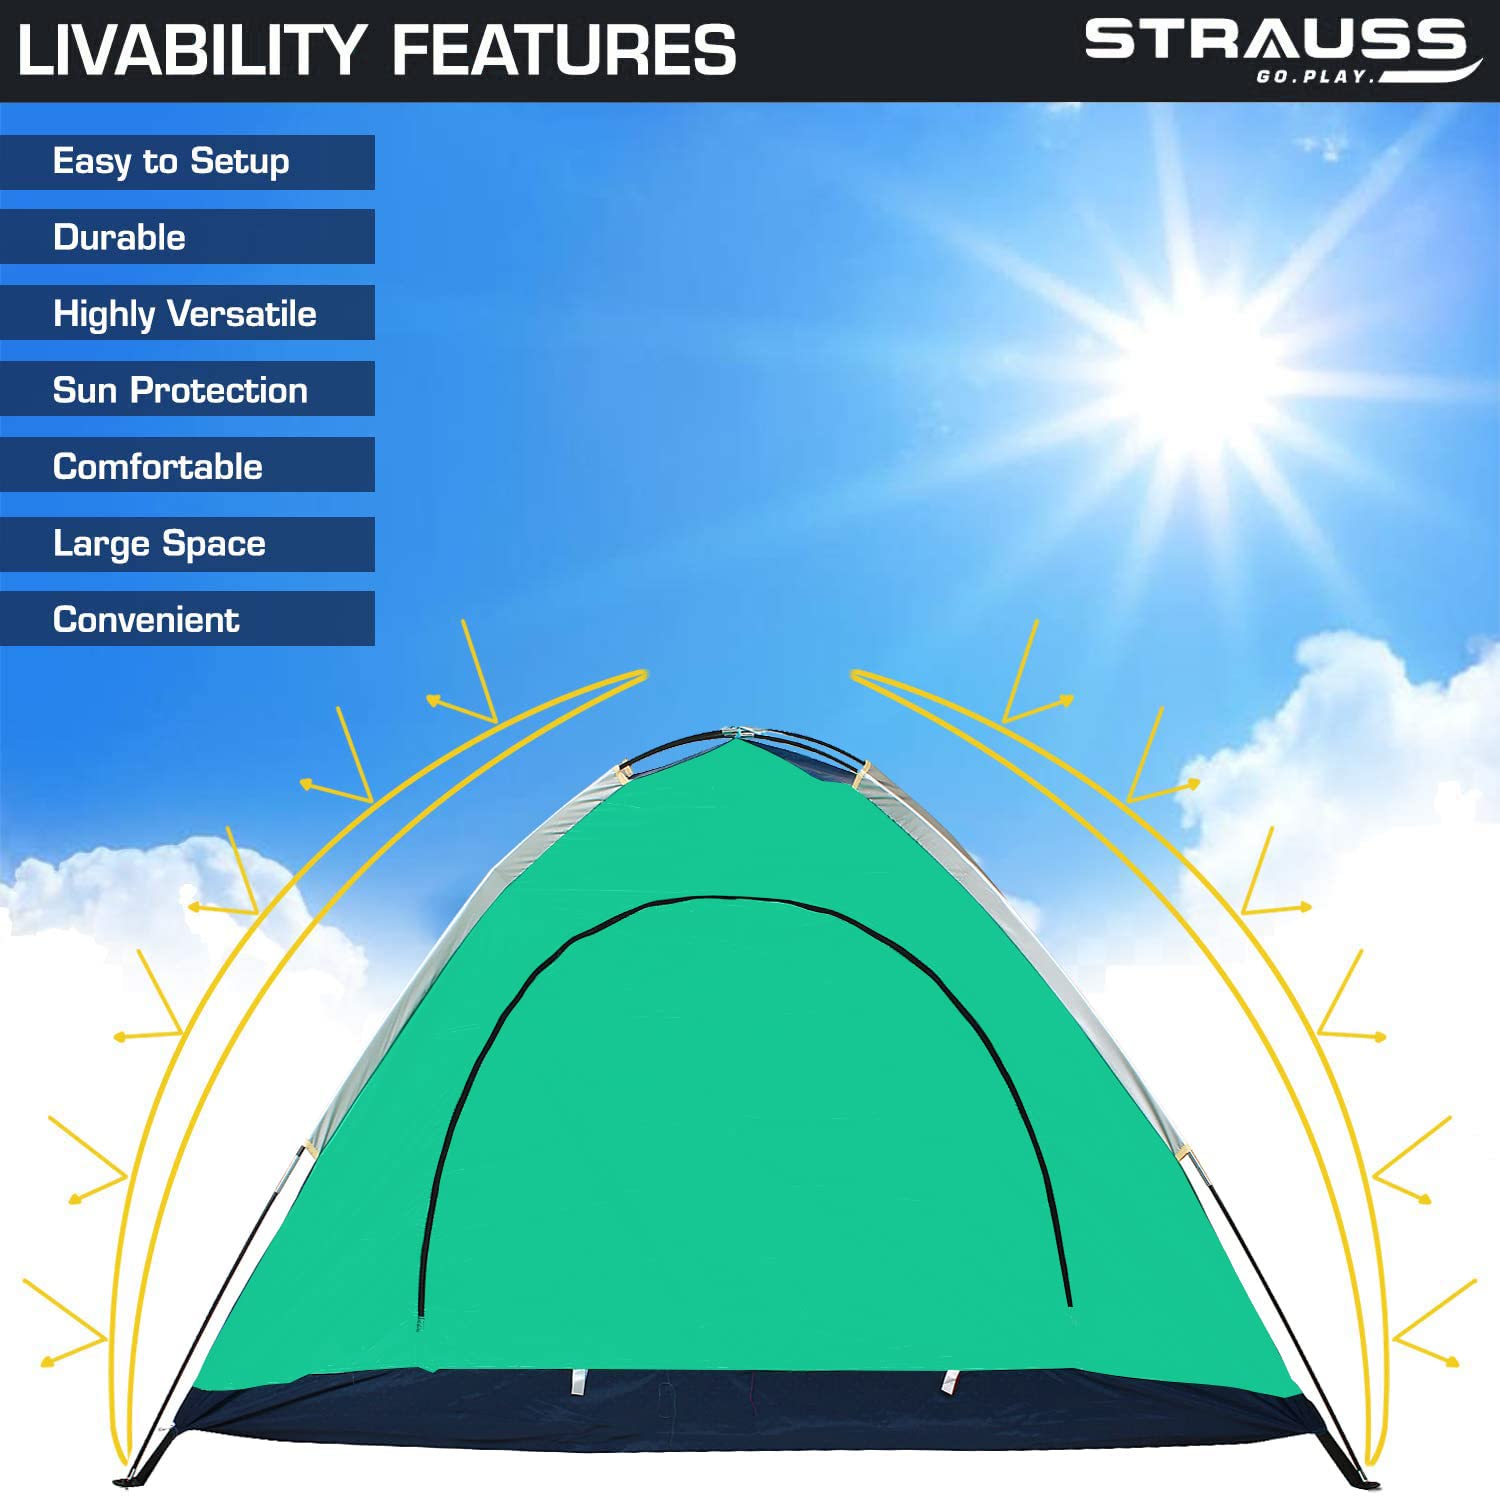 STRAUSS Portable Camping Tent | 5-10 Minutes Easy Setup | Waterproof and Windproof Tent for Camping | Superior Air Ventilation| Ideal for 2 Persons,(Blue and Green)